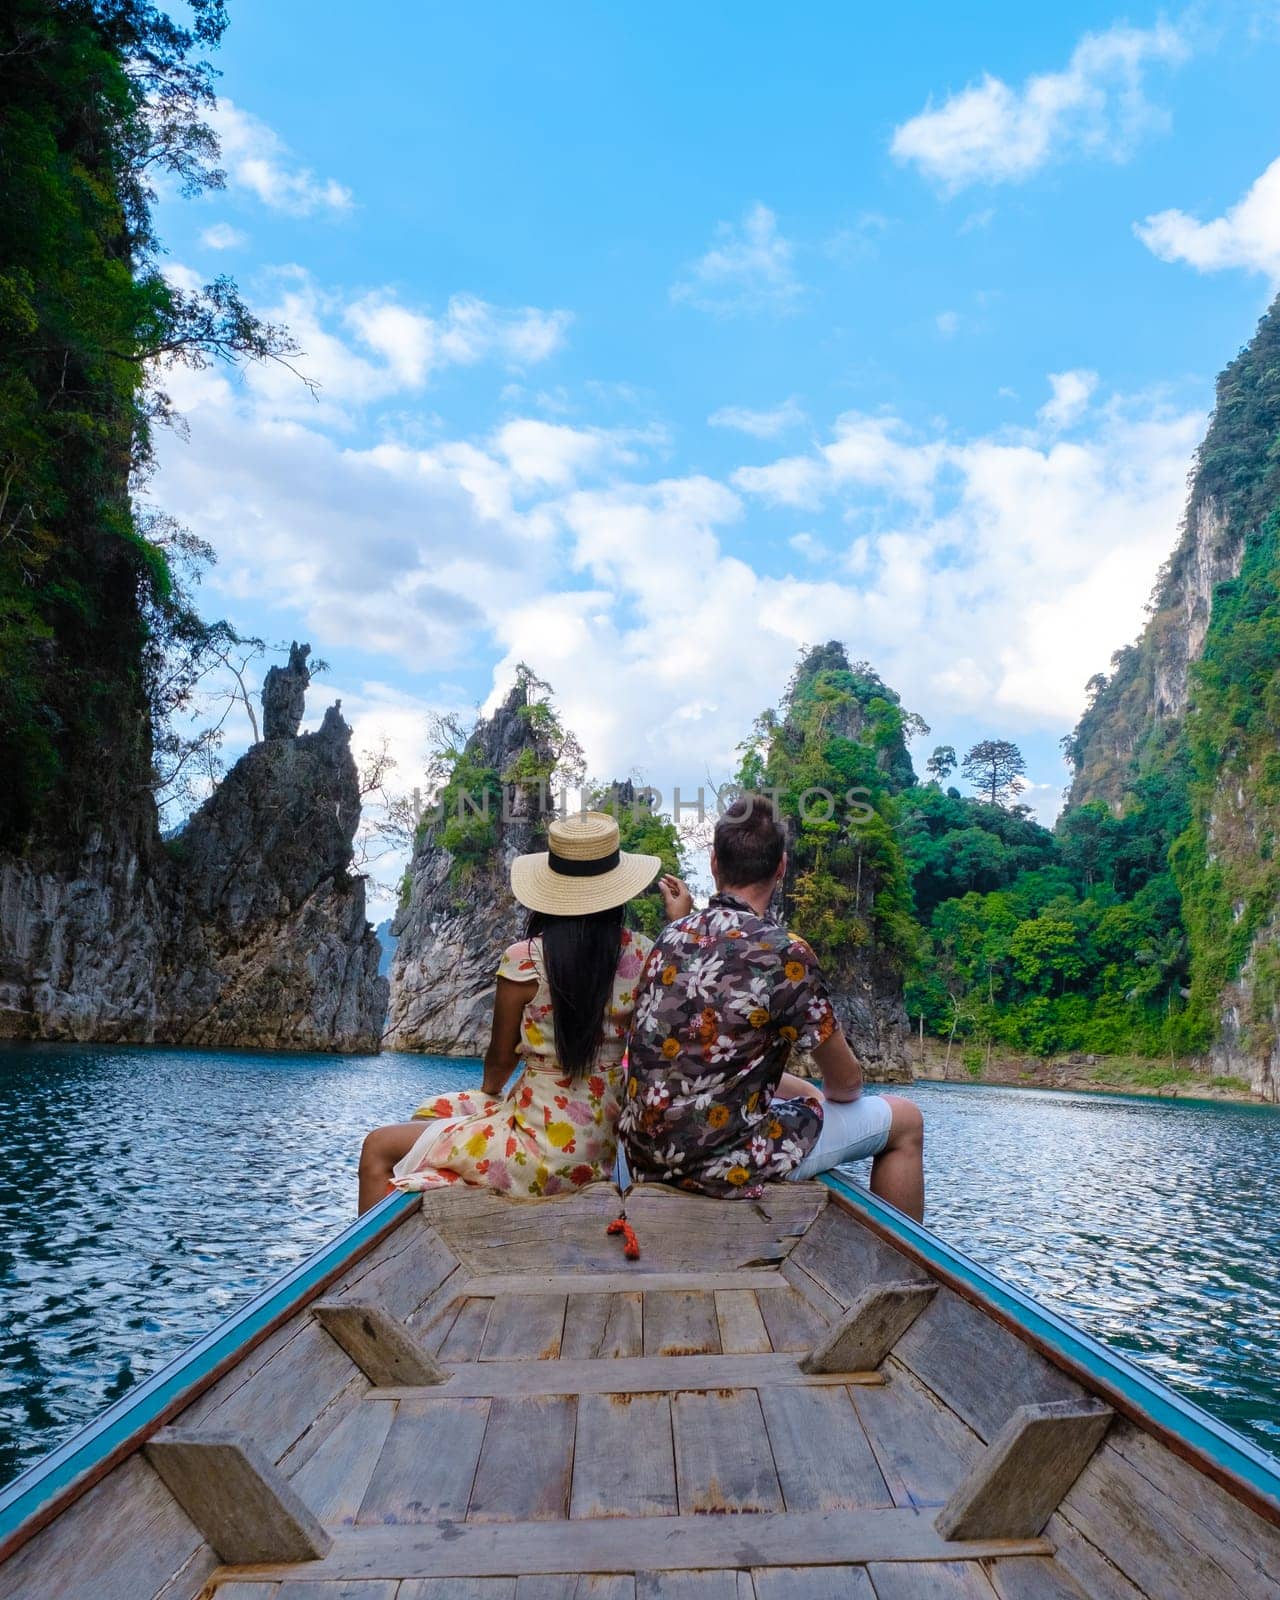 A couple of men and women in front of a longtail boat in Khao Sok Thailand, Scenic mountains on the lake in Khao Sok National Park South East Asia on a sunny day